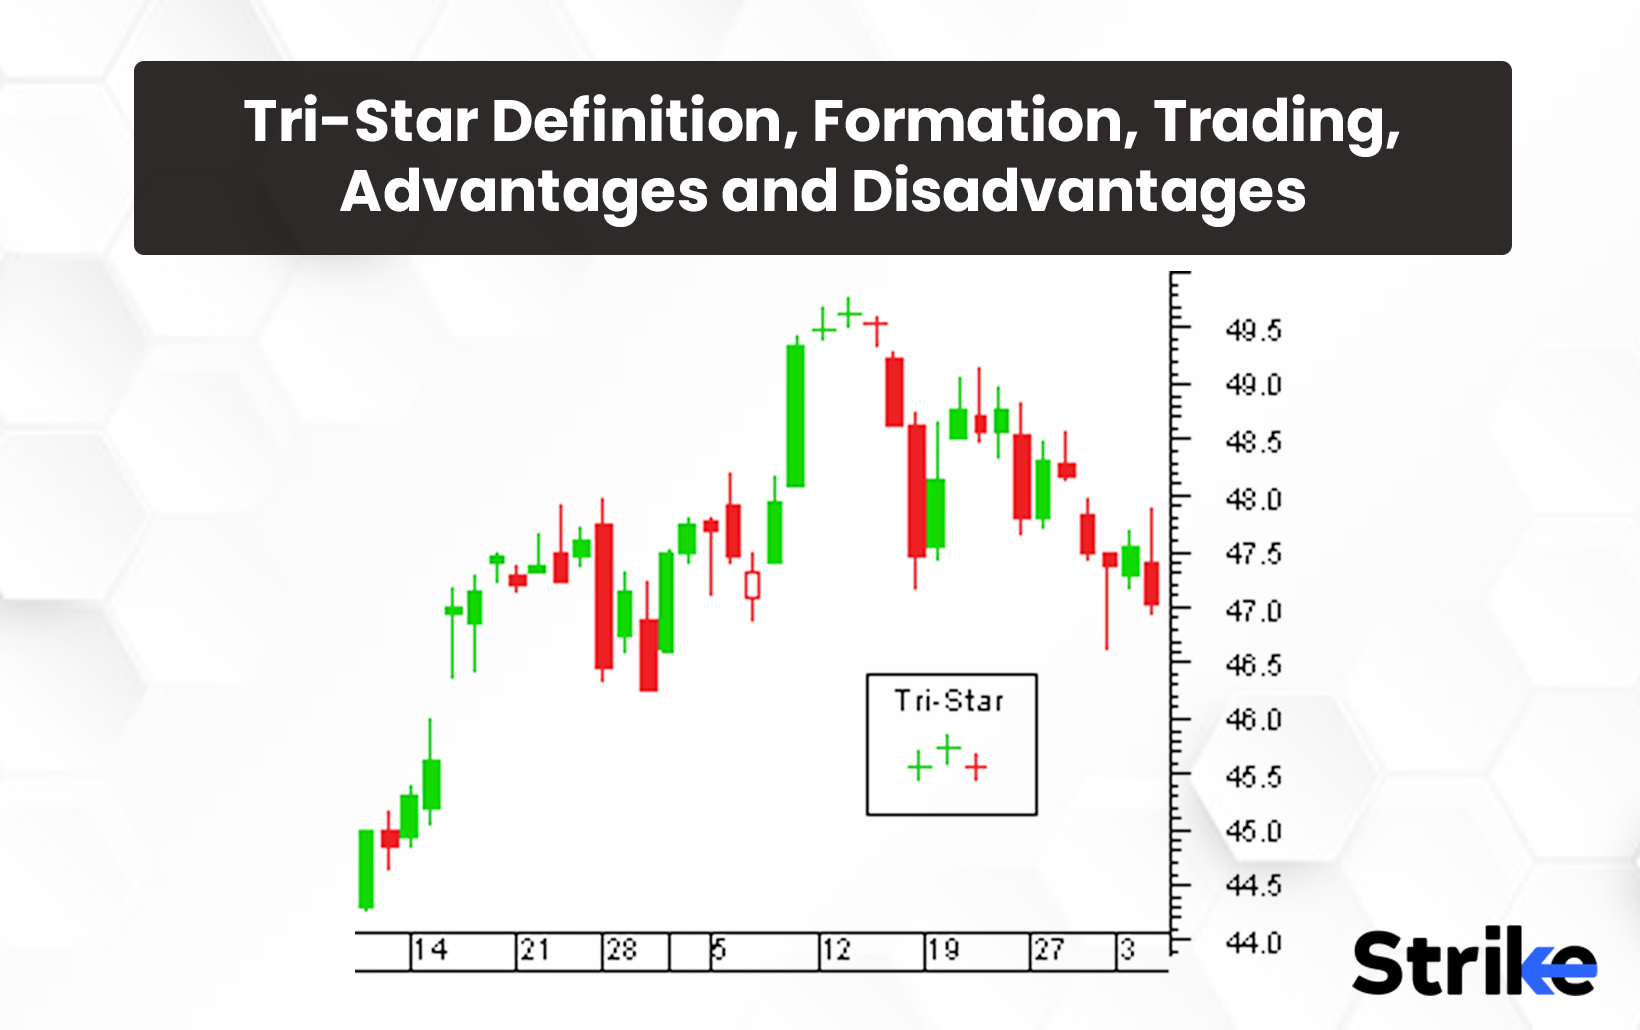 Tri-Star: Definition, Formation, Trading, Advantages and Disadvantages